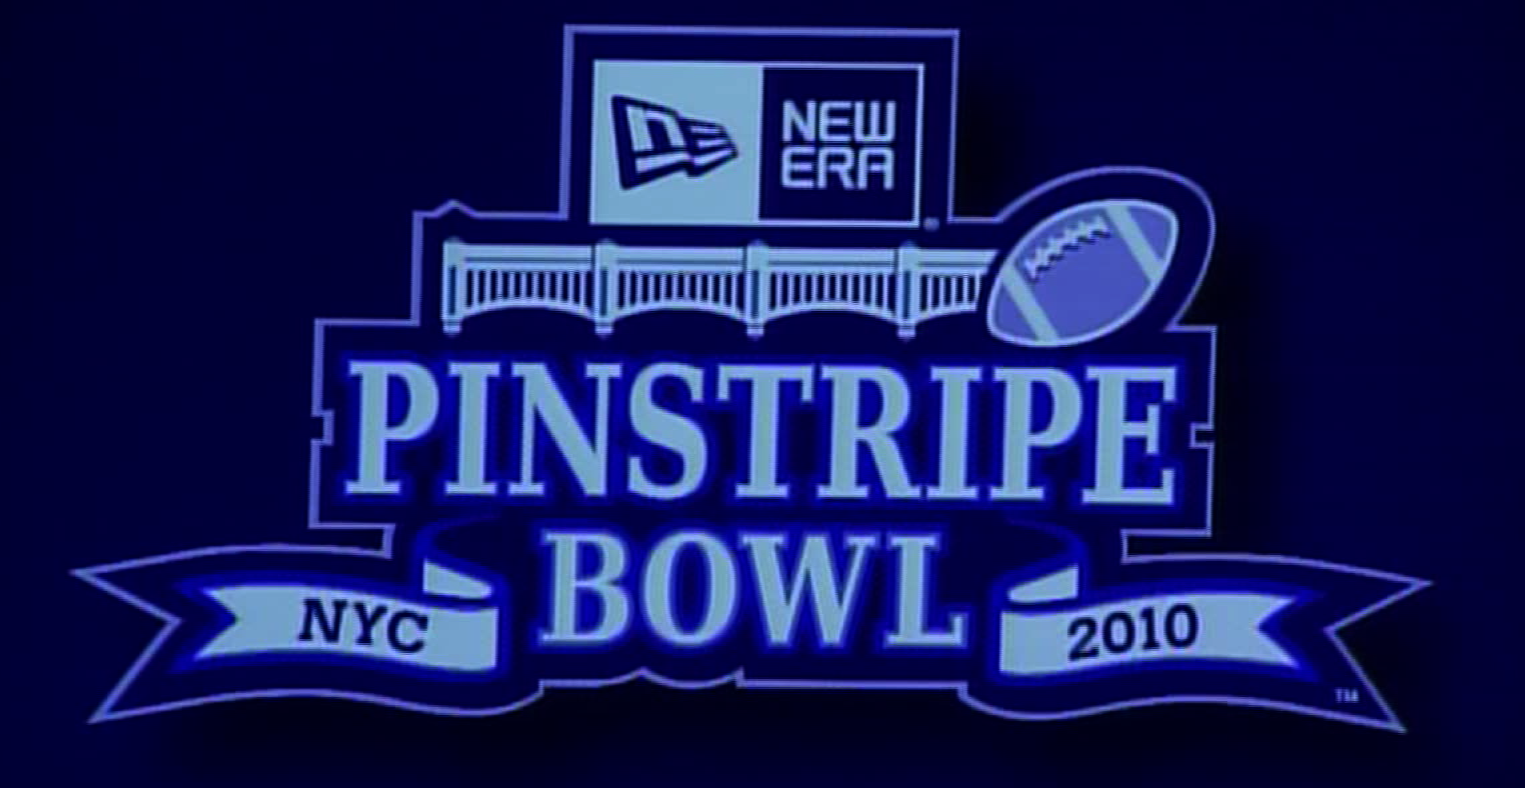 My Day At The New Era Pinstripe Bowl The Campus Socialite